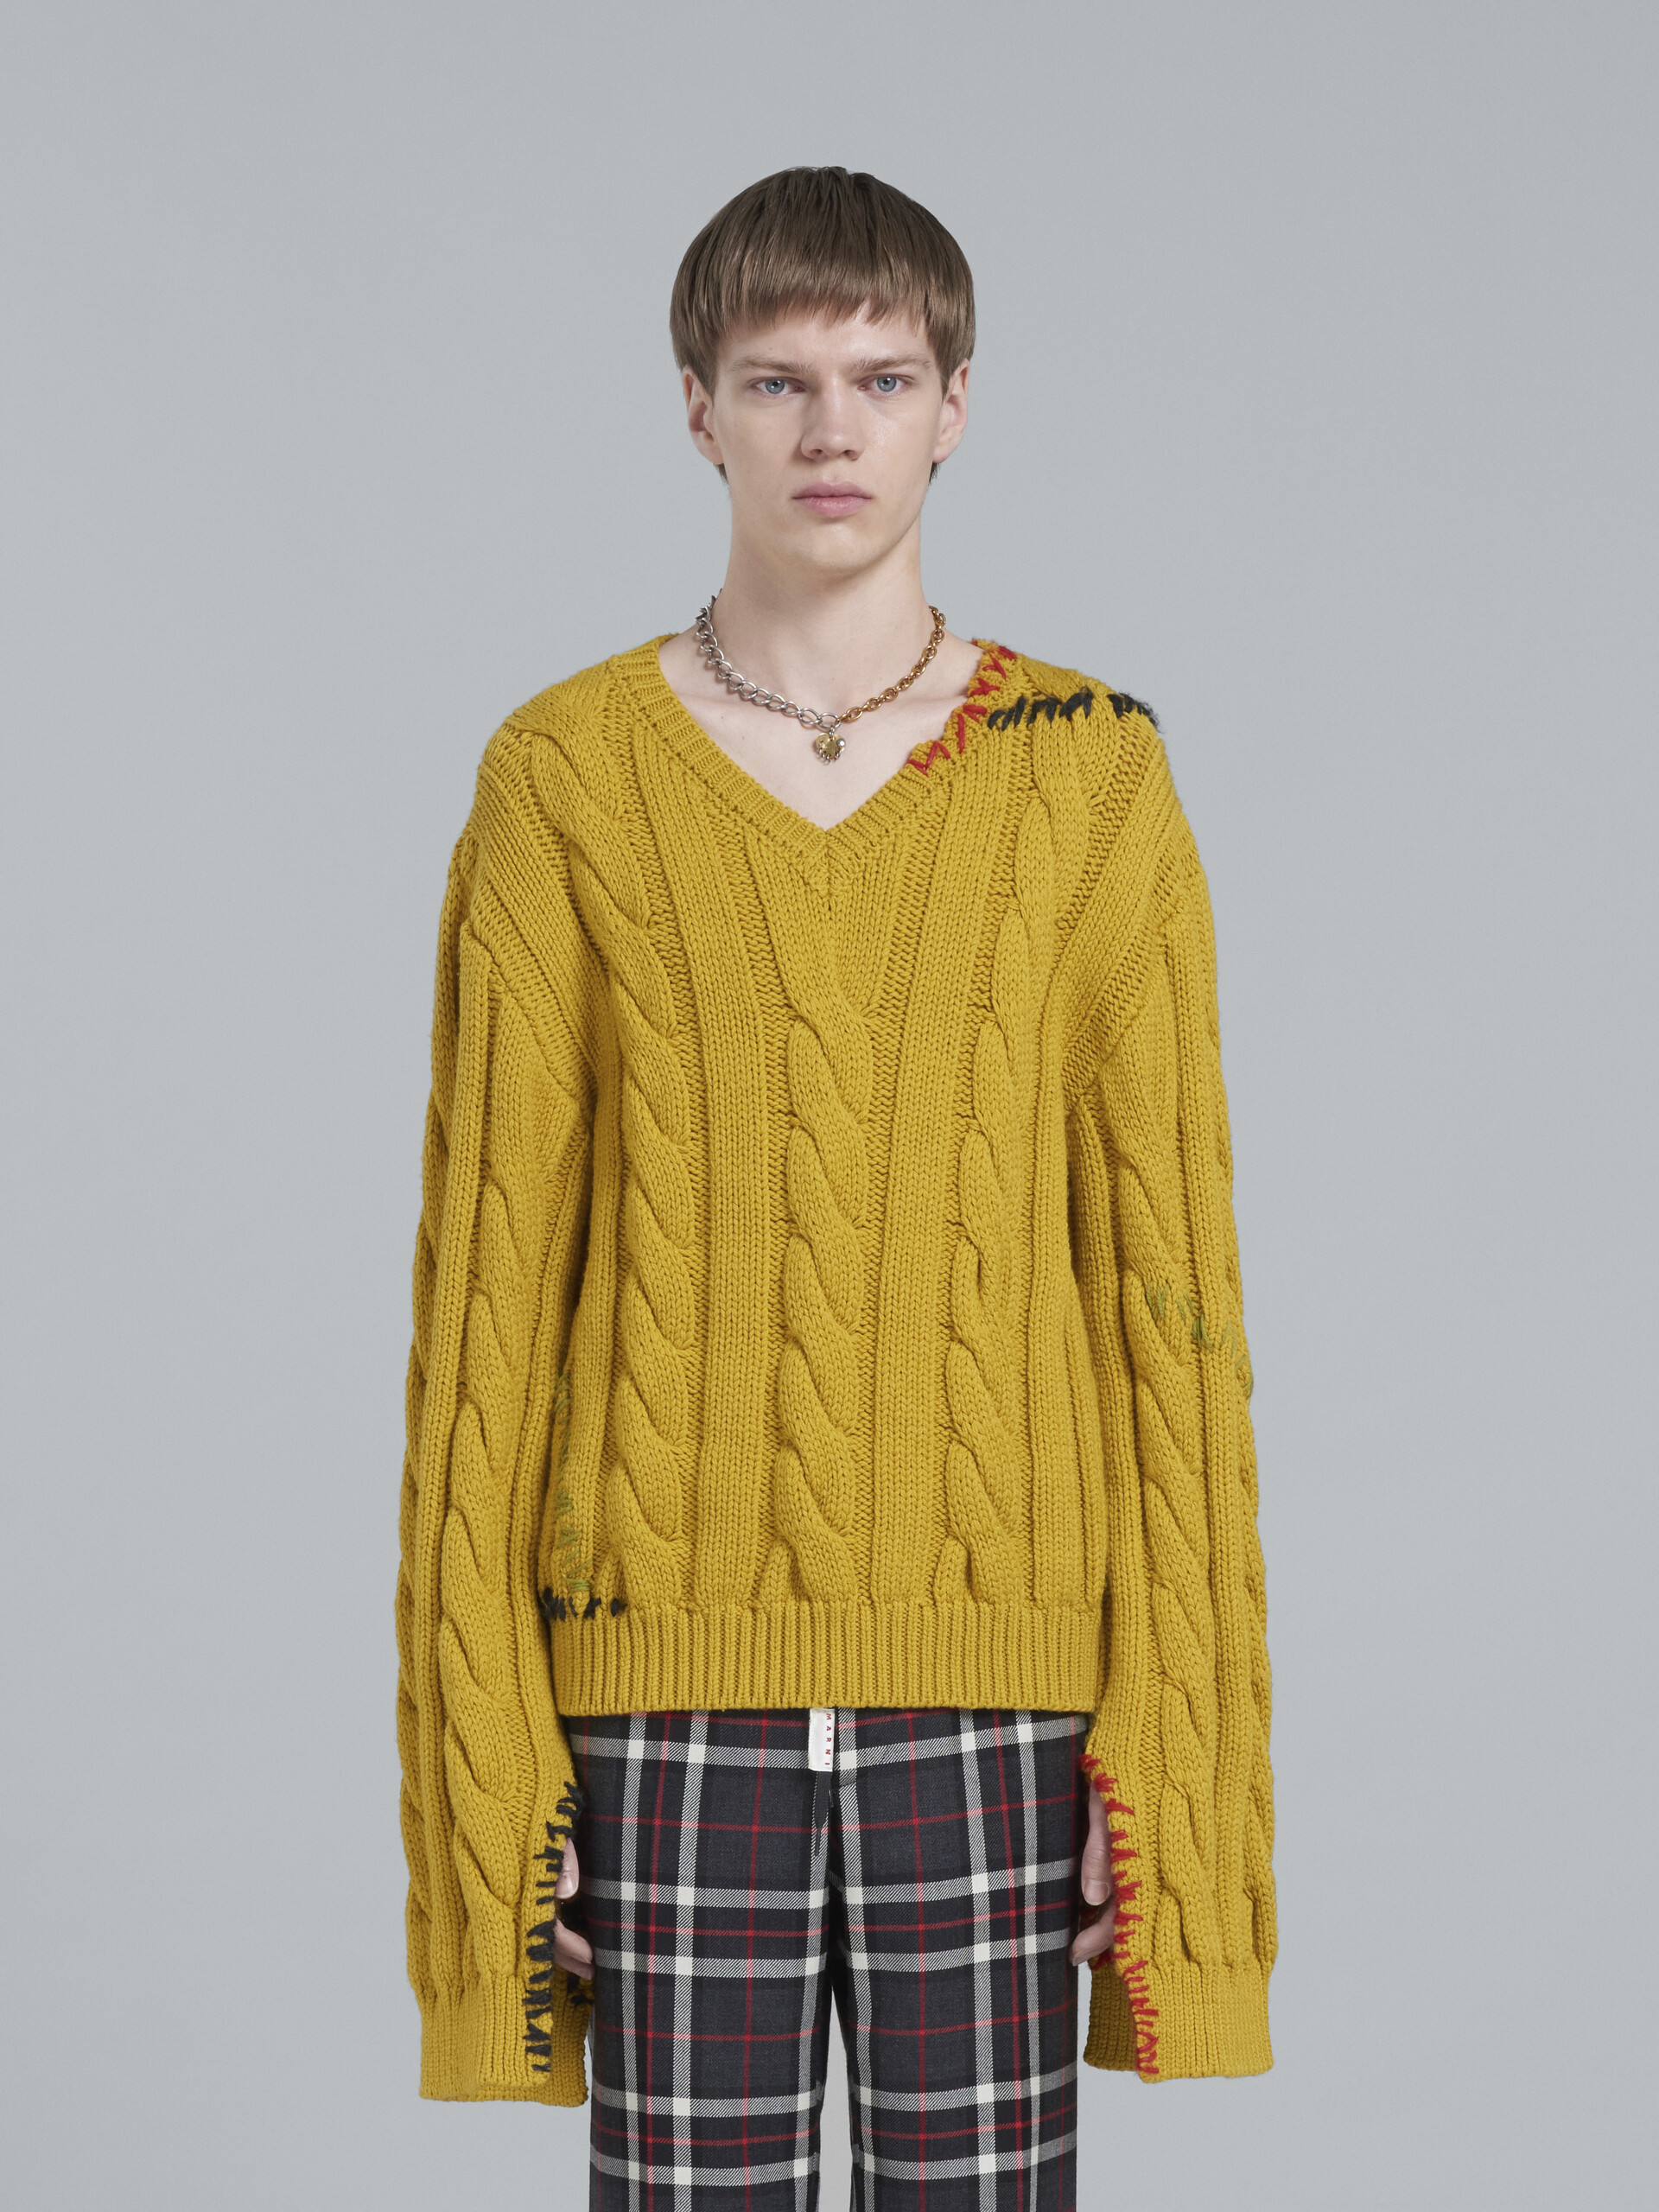 Cedar yellow cable-knit sweater - Pullovers - Image 2